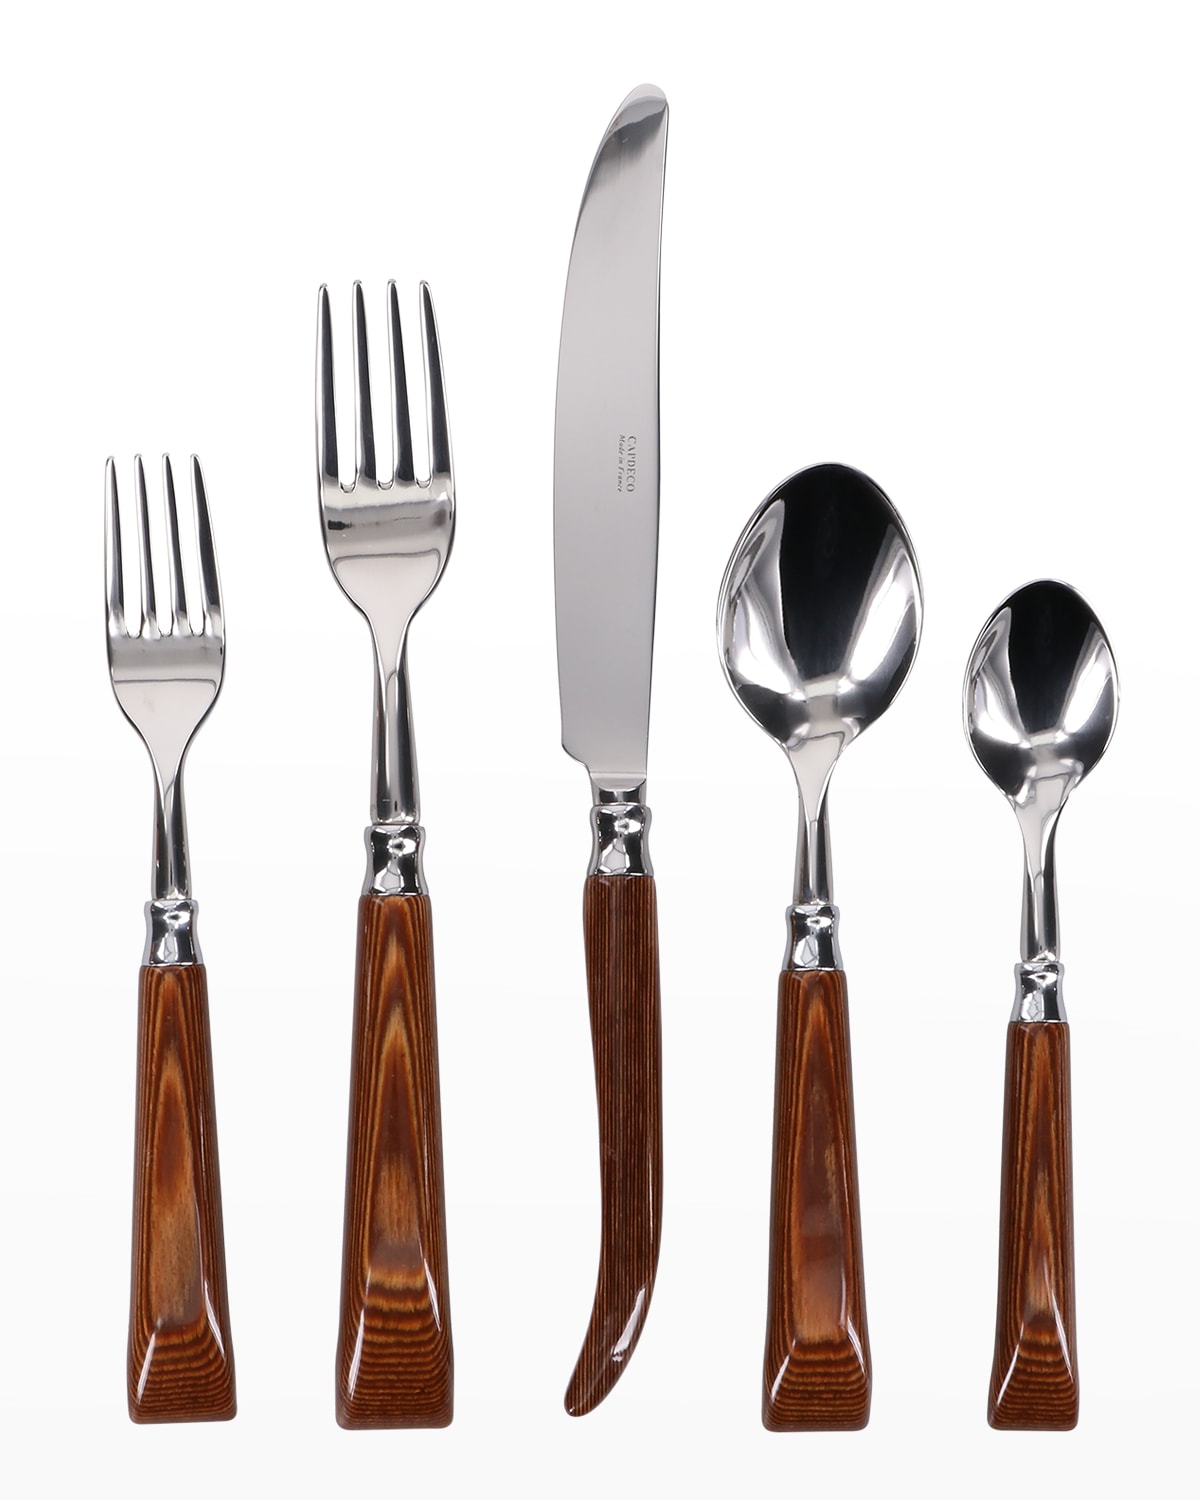 Capdeco Orio 5-piece Place Setting, Wood In Dark Wood